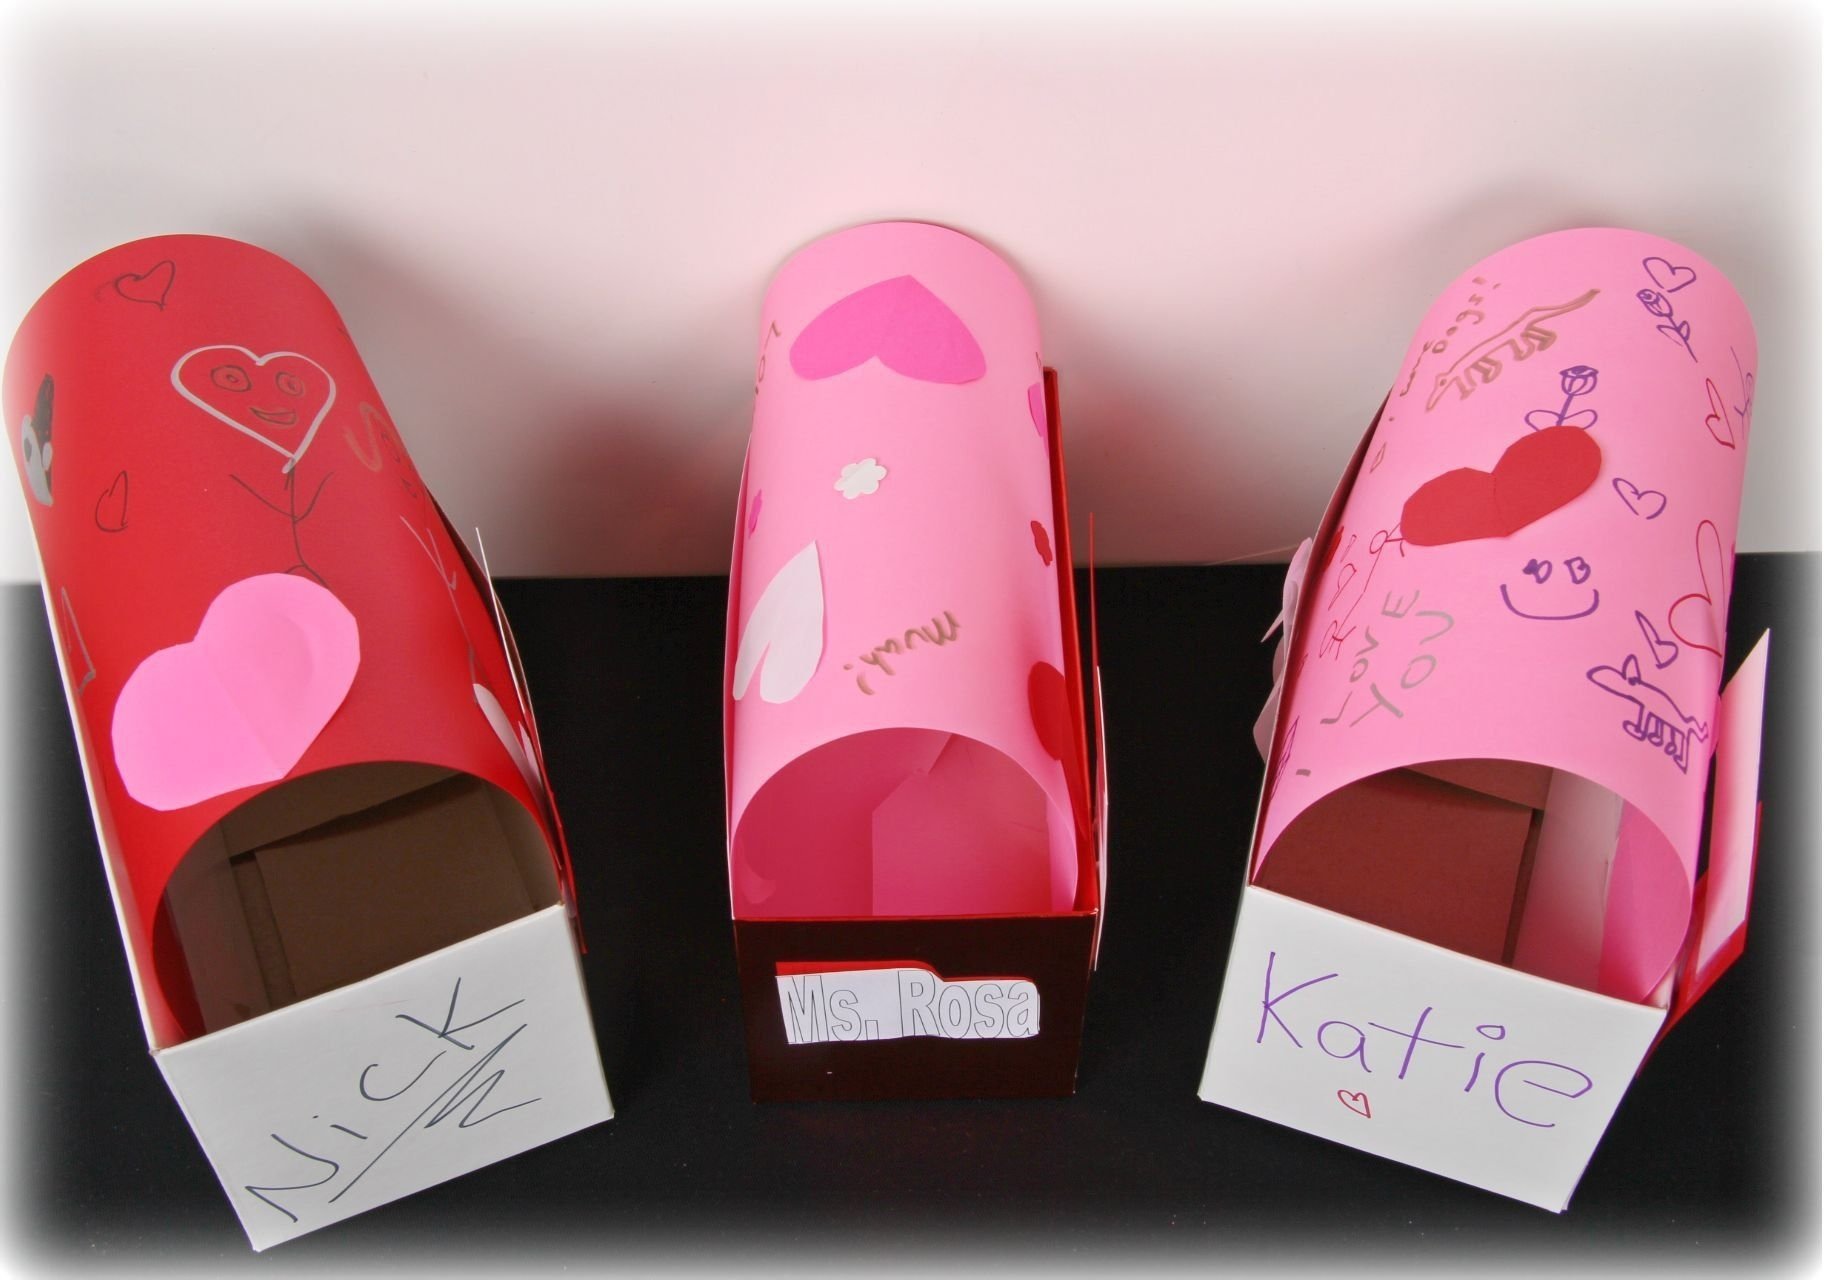 10 Fashionable Ideas For Valentines Day Boxes For Kids crafting idea for teachers valentines day boxes for kids box 2022